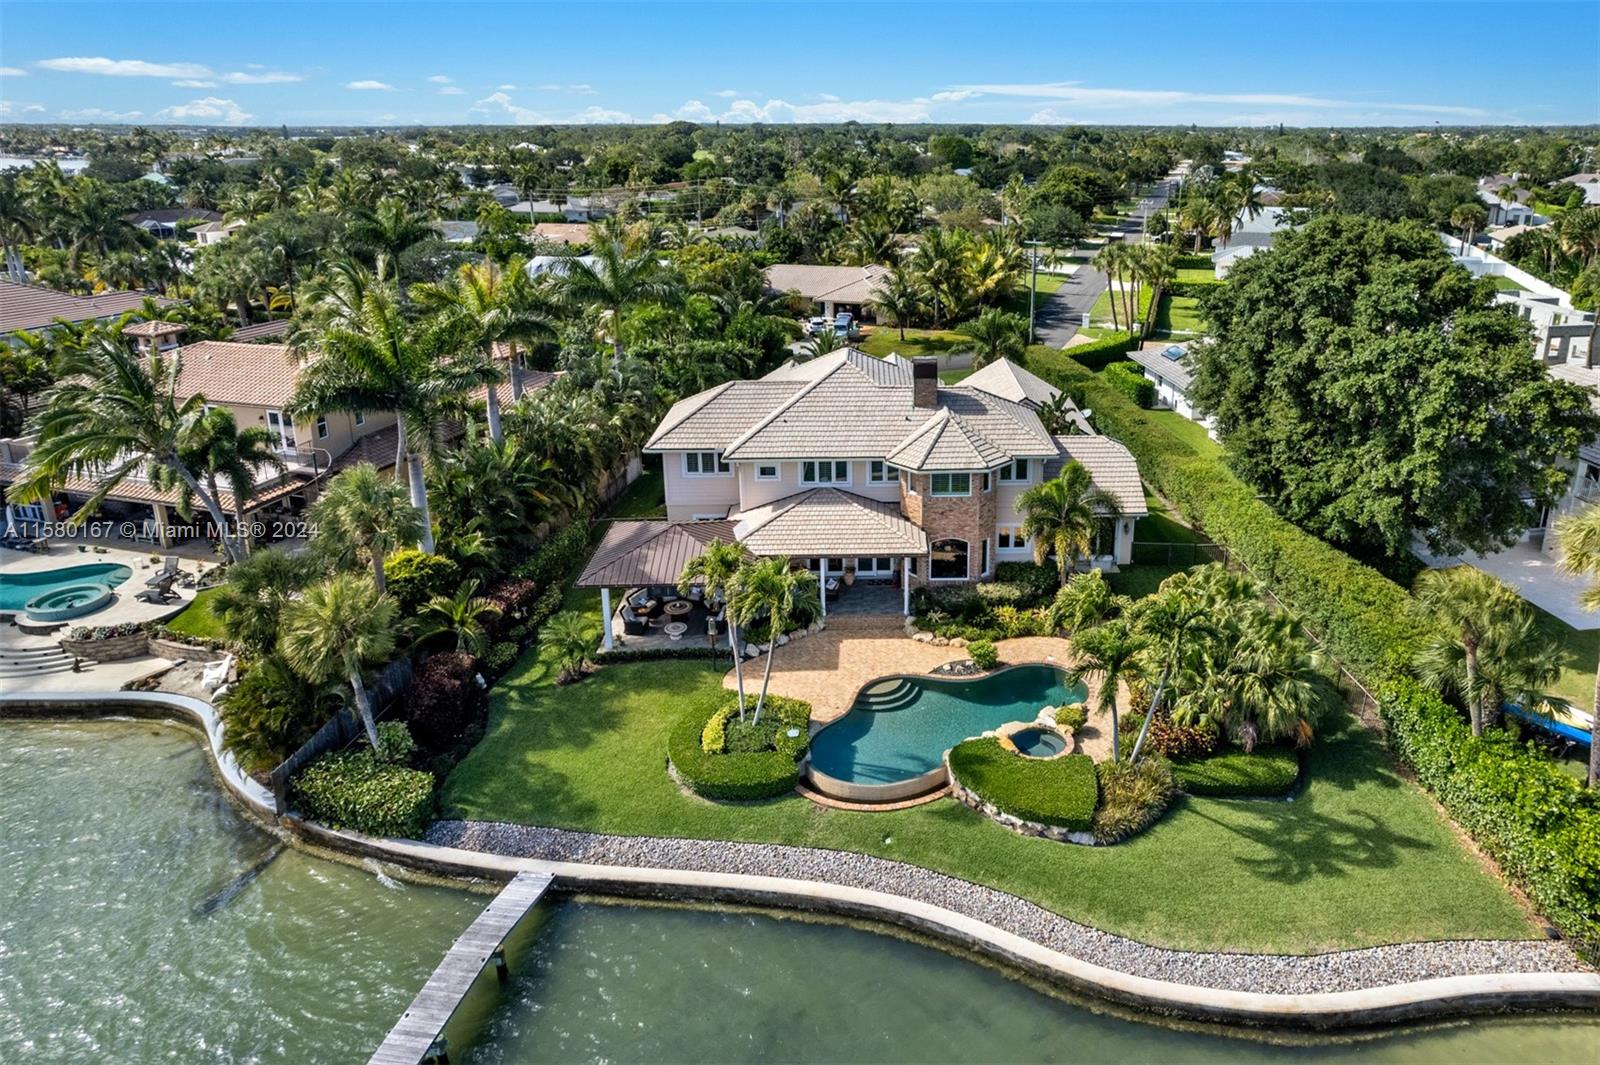 Property for Sale at 20 Yacht Club Pl Pl, Tequesta, Martin County, Florida - Bedrooms: 5 
Bathrooms: 4  - $10,750,000